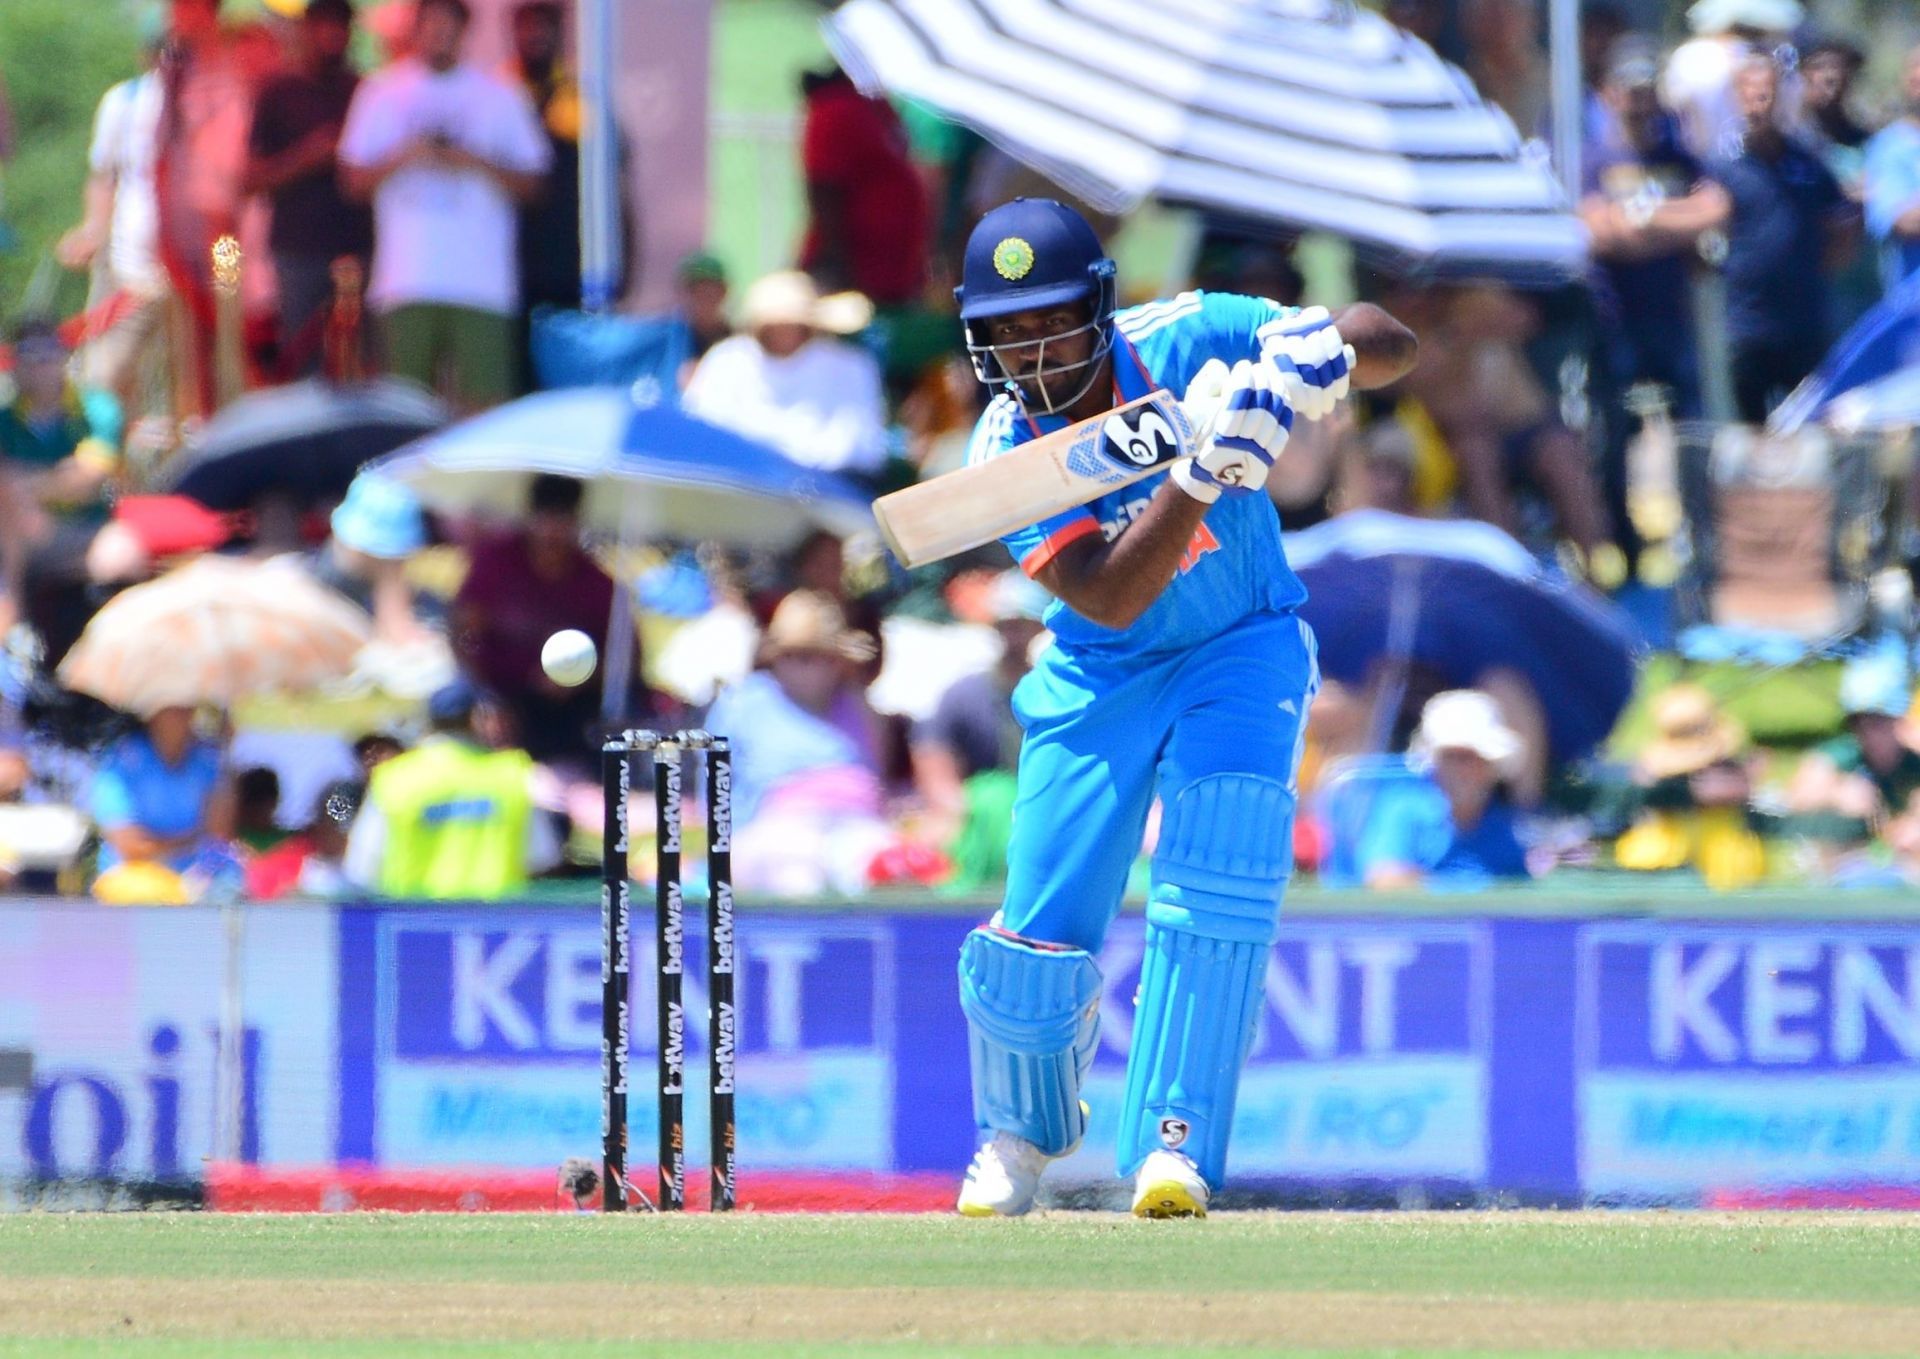 Sanju Samson was dismissed for a golden duck in the main game. [P/C: Getty]